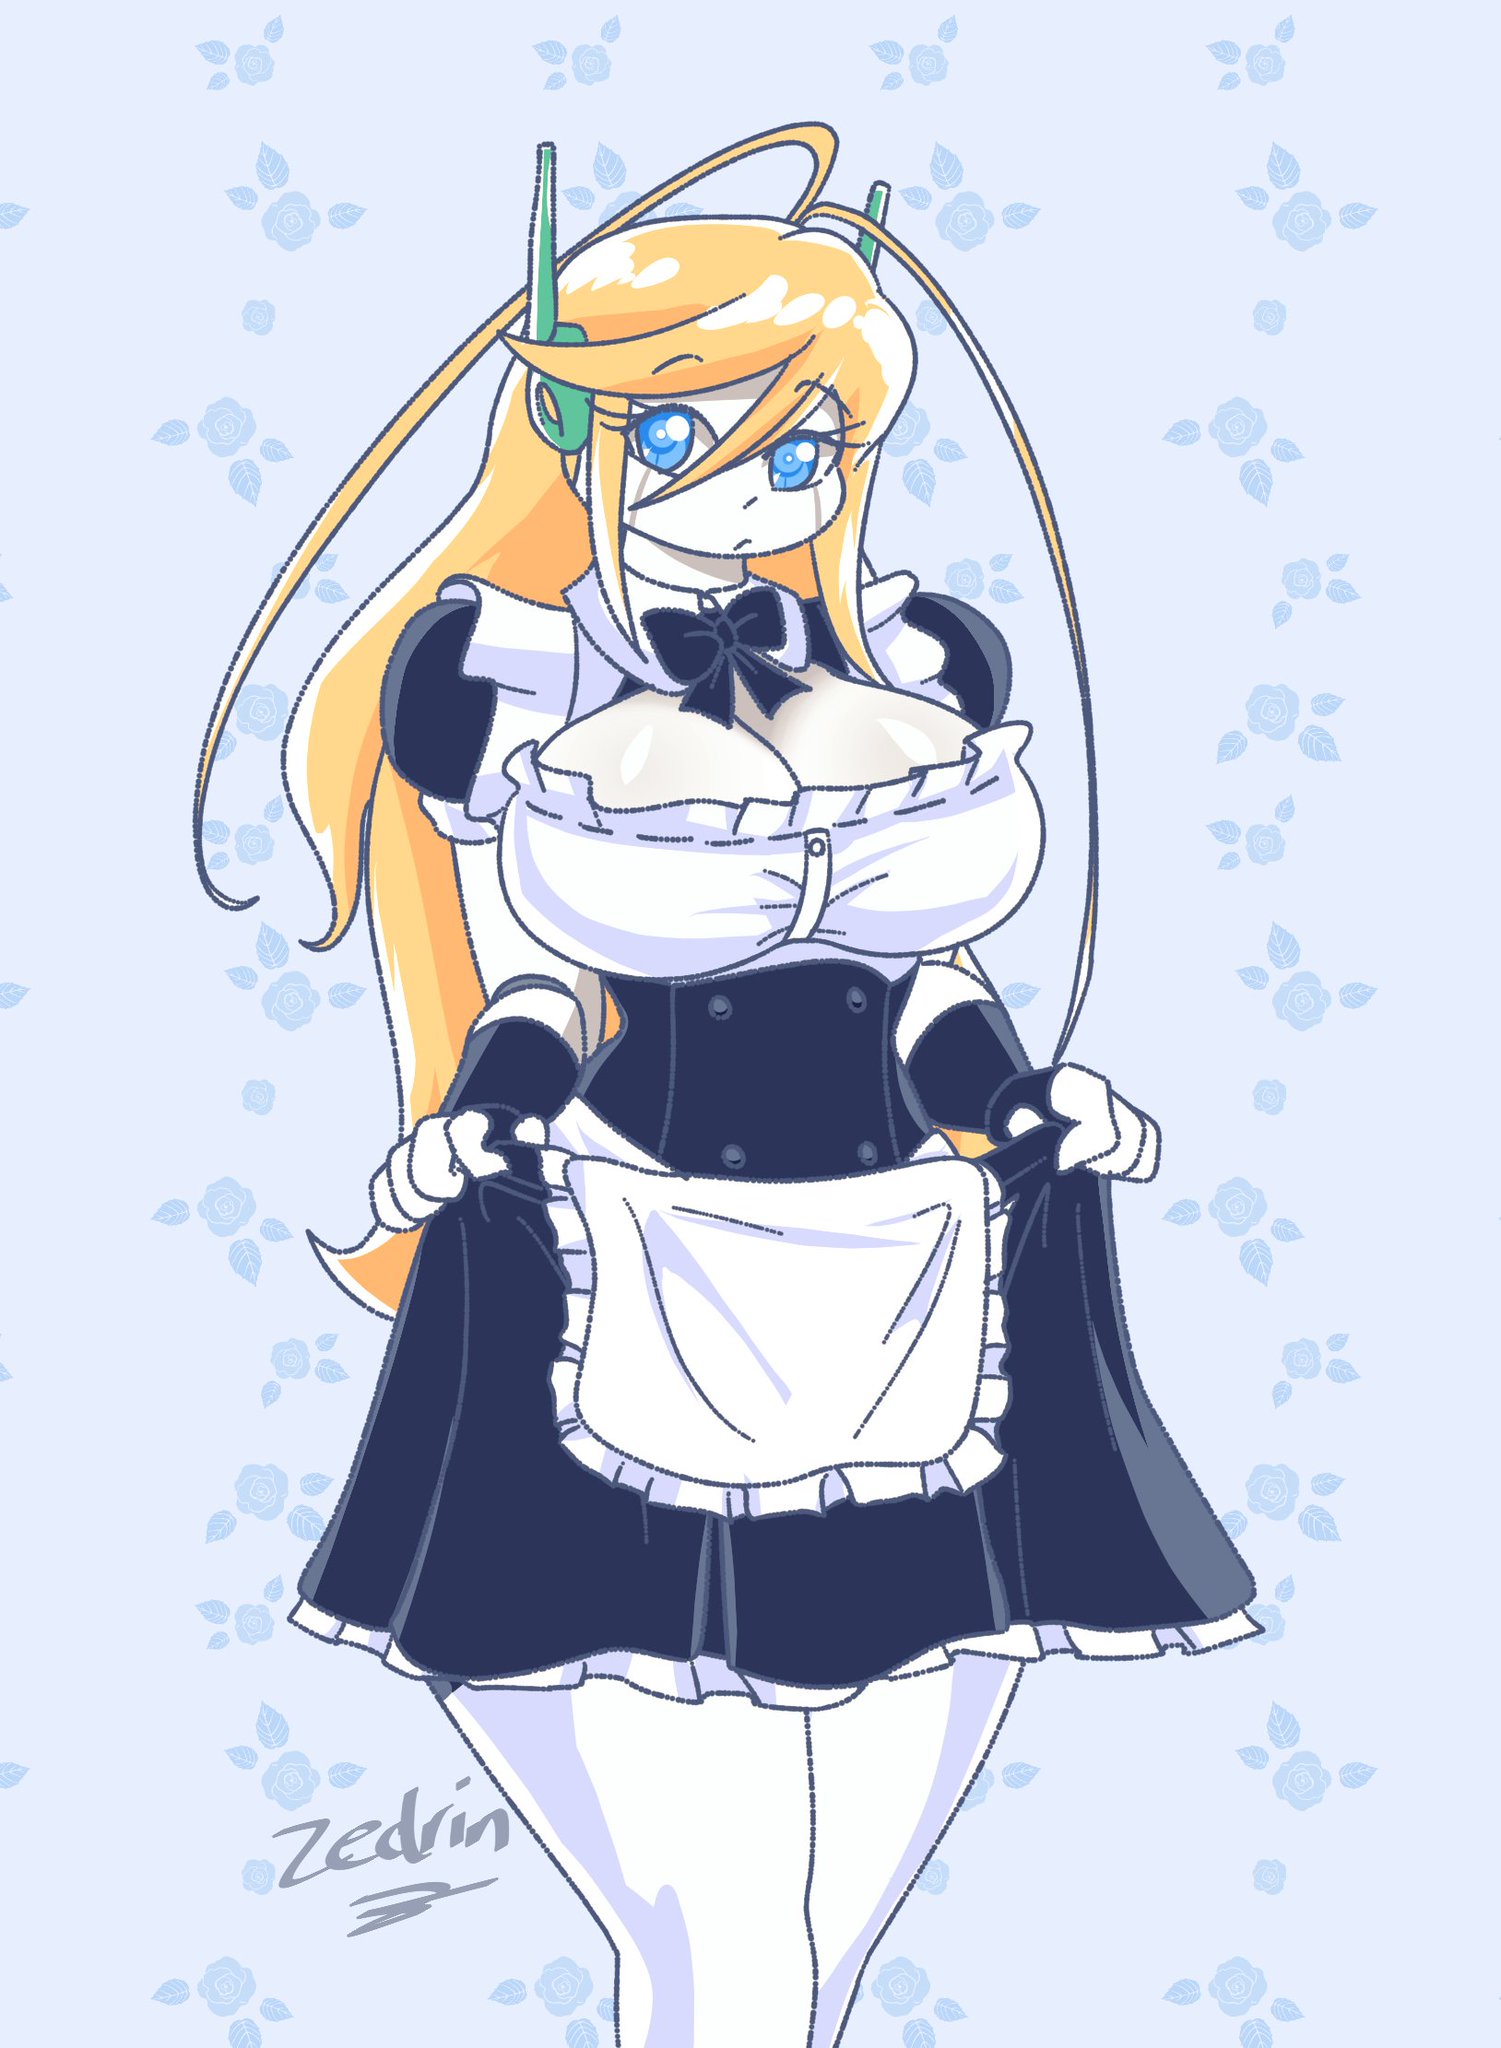 “Curly Brace in a maid outfit. 